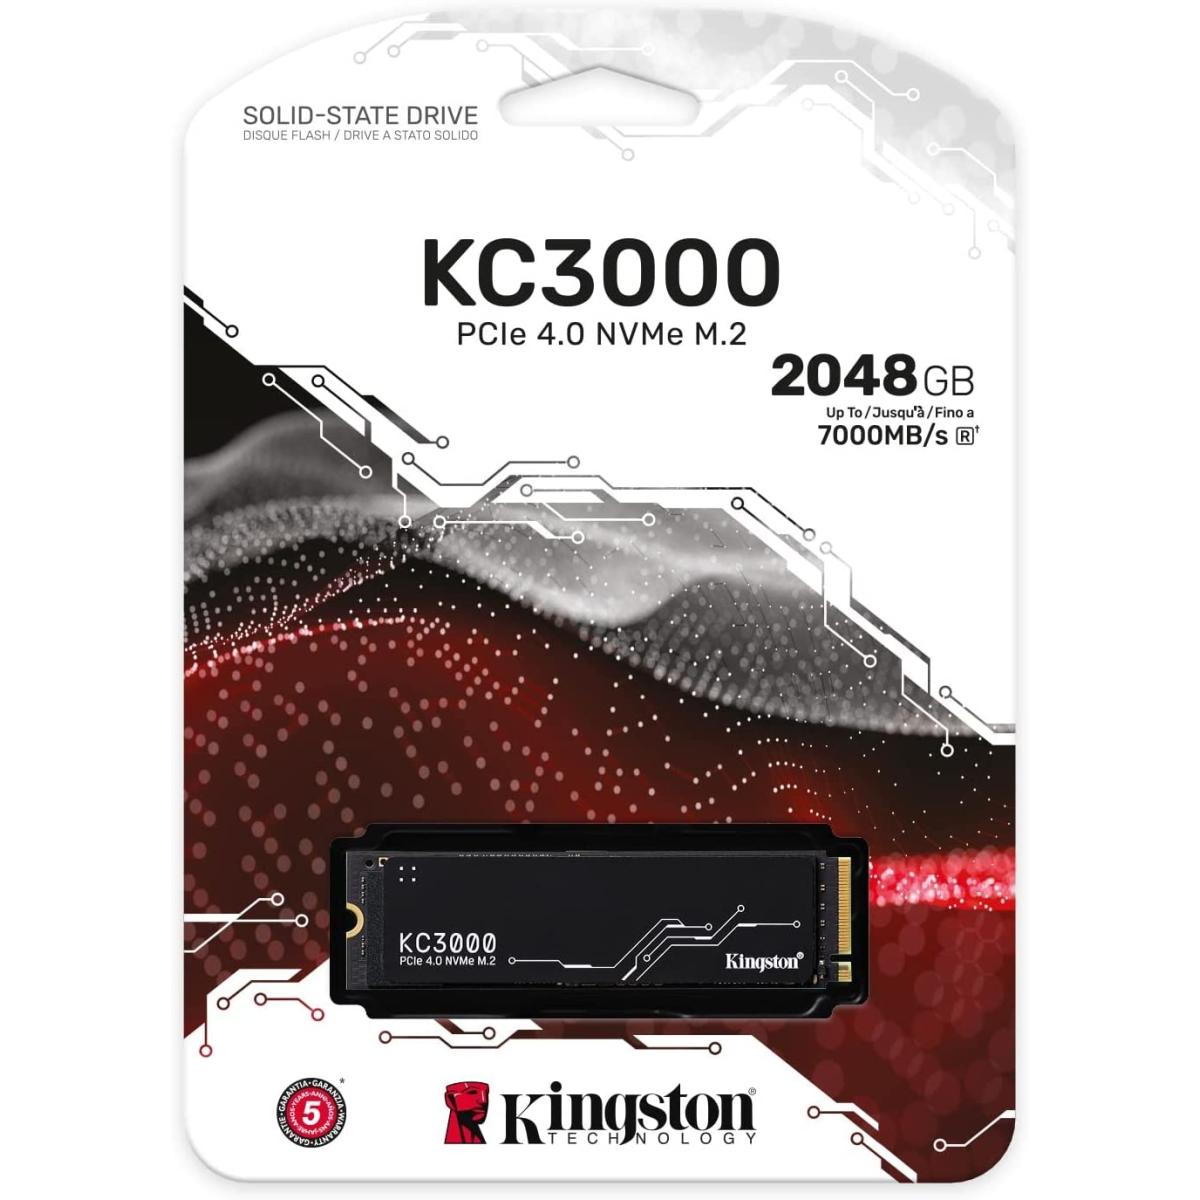 Kingston KC3000 2TB PCIe 4.0 NVMe M.2 SSD up to 7,000MBs